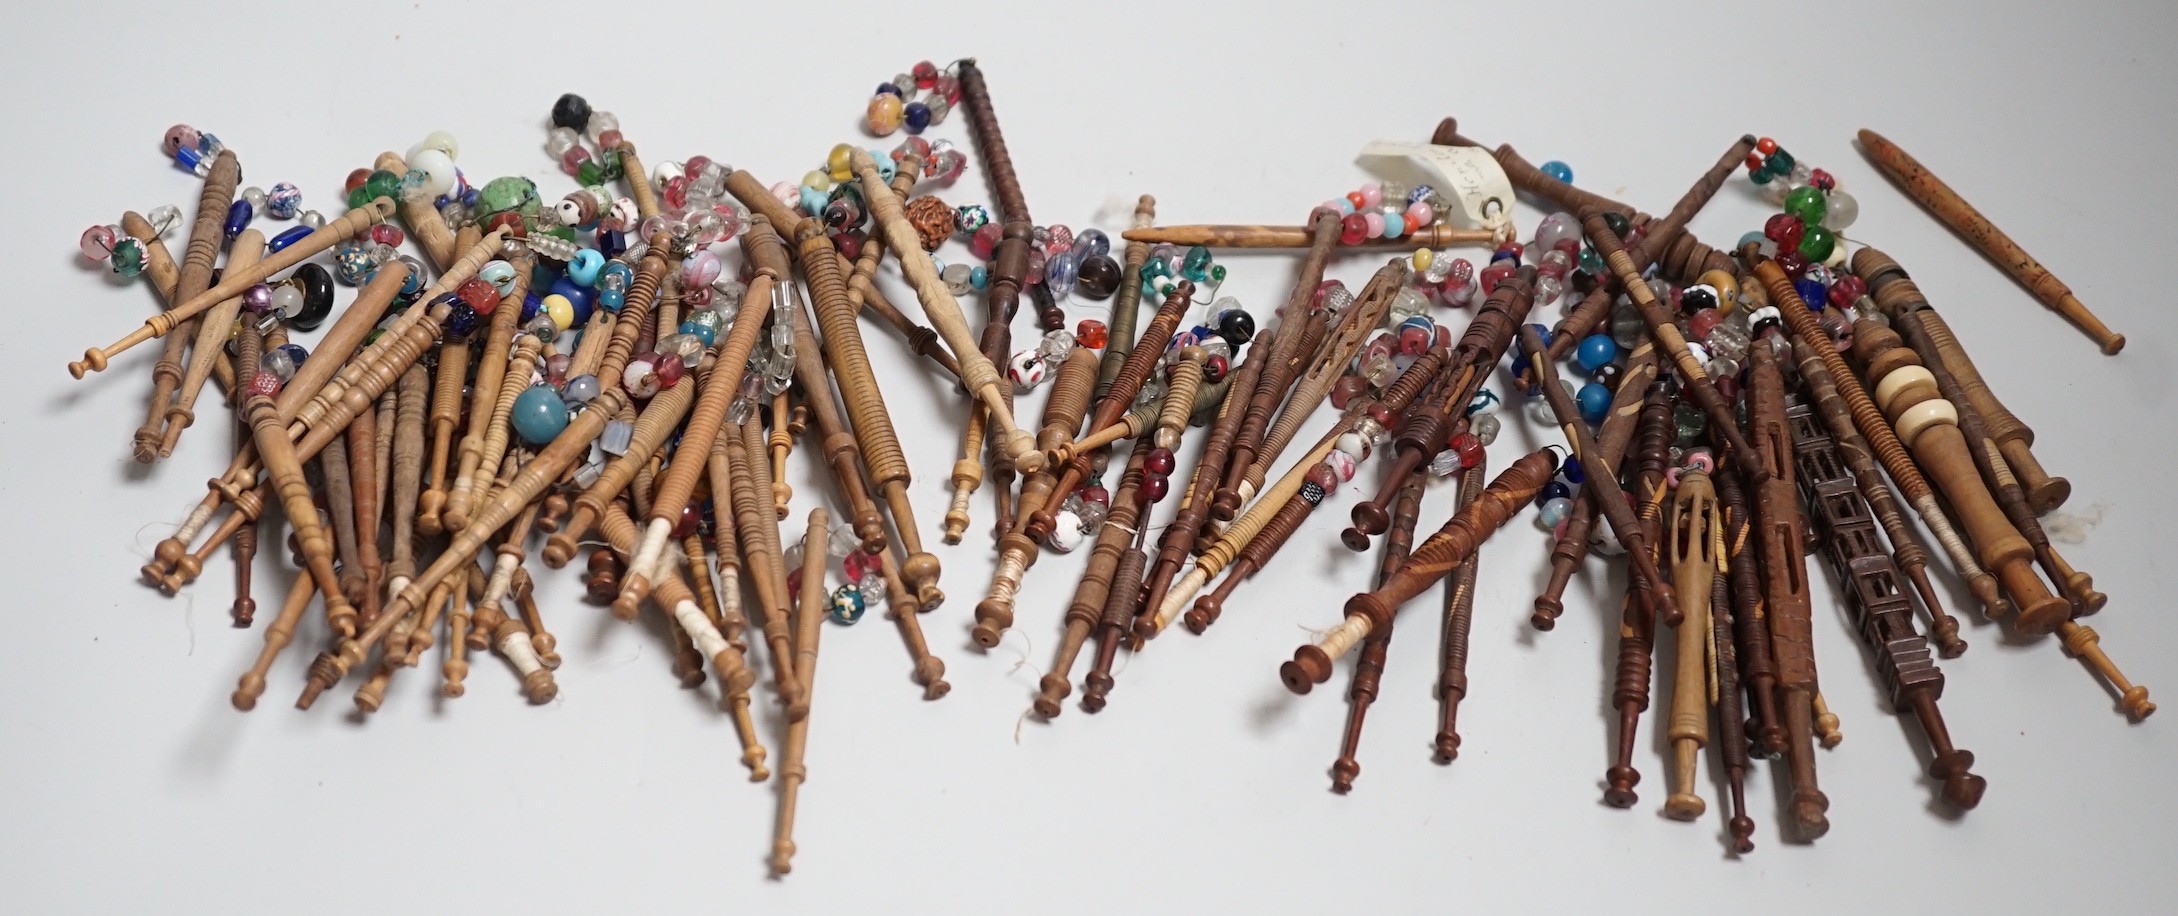 Fifty 19th century finely turned wooden lace bobbins with beaded ends together with 35 ornate wooden bobbins with beaded ends and 5 plain wooden bobbins unleaded (90)